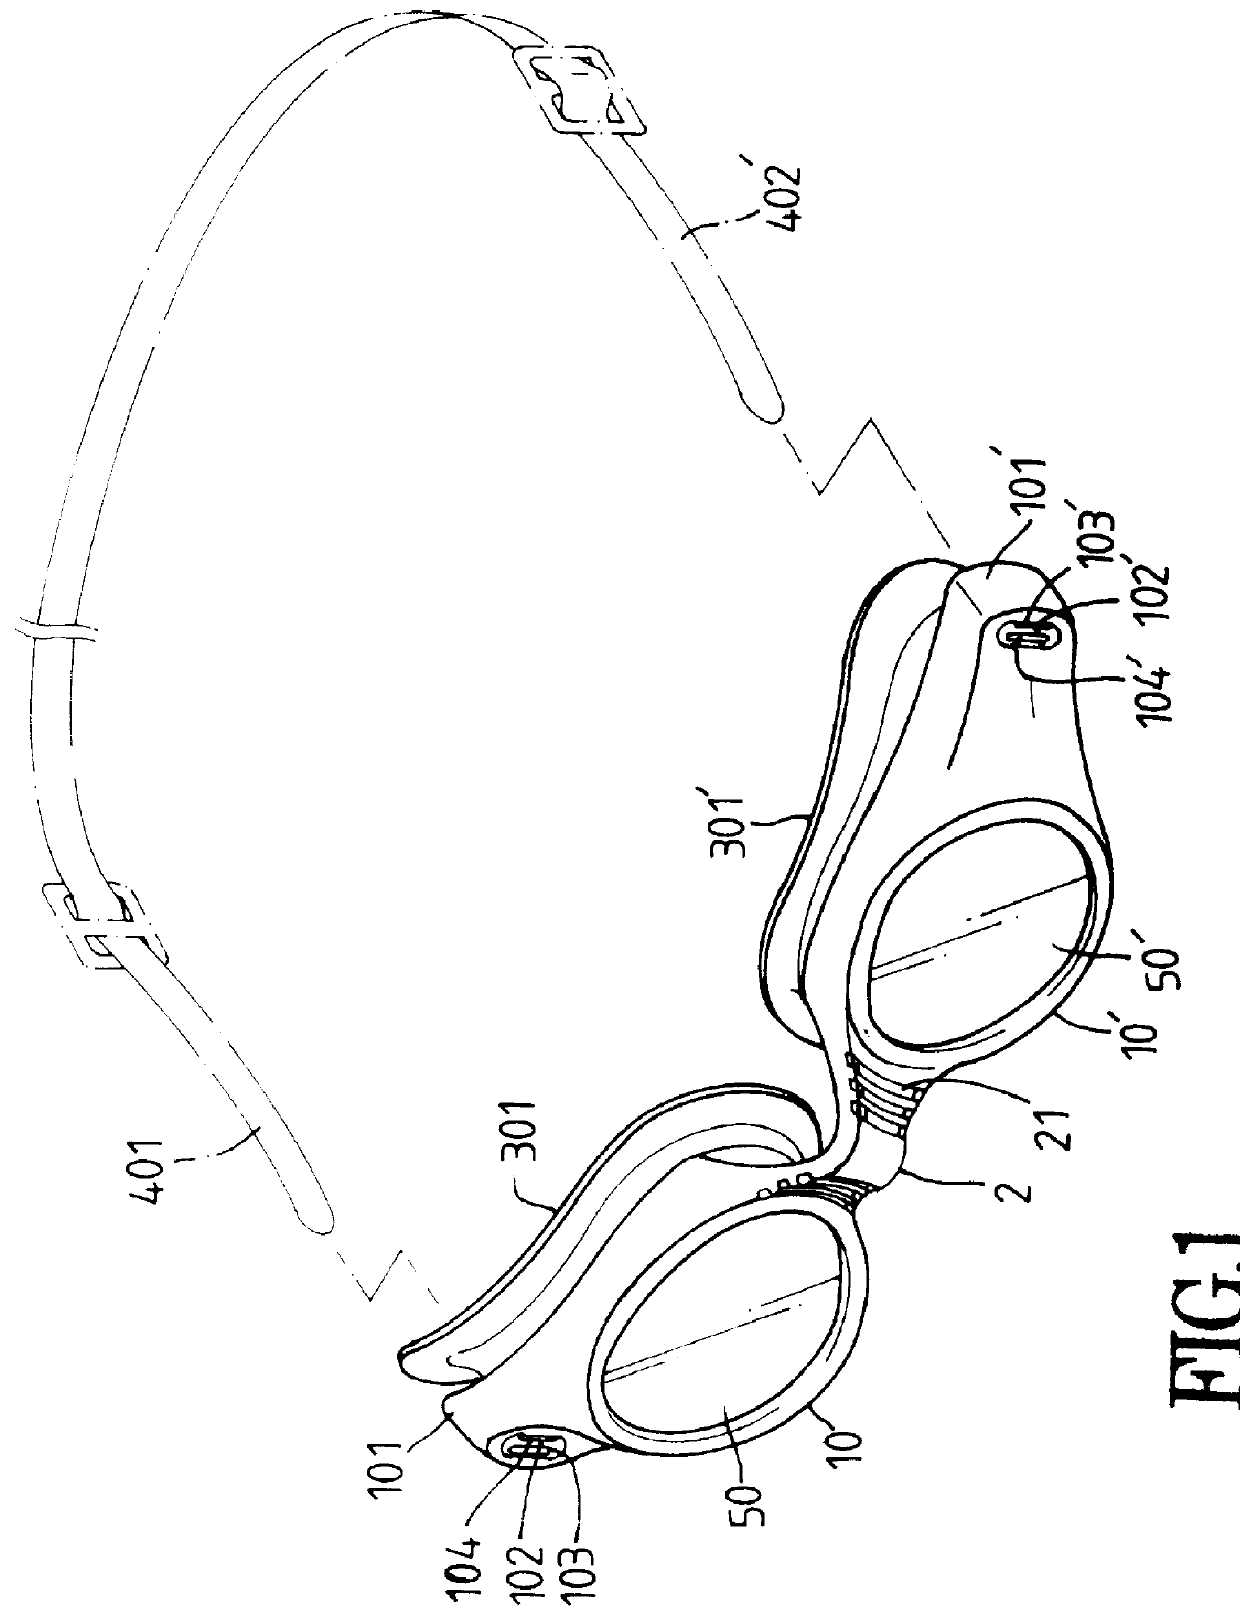 Goggles with connecting plate assembly at outer ends